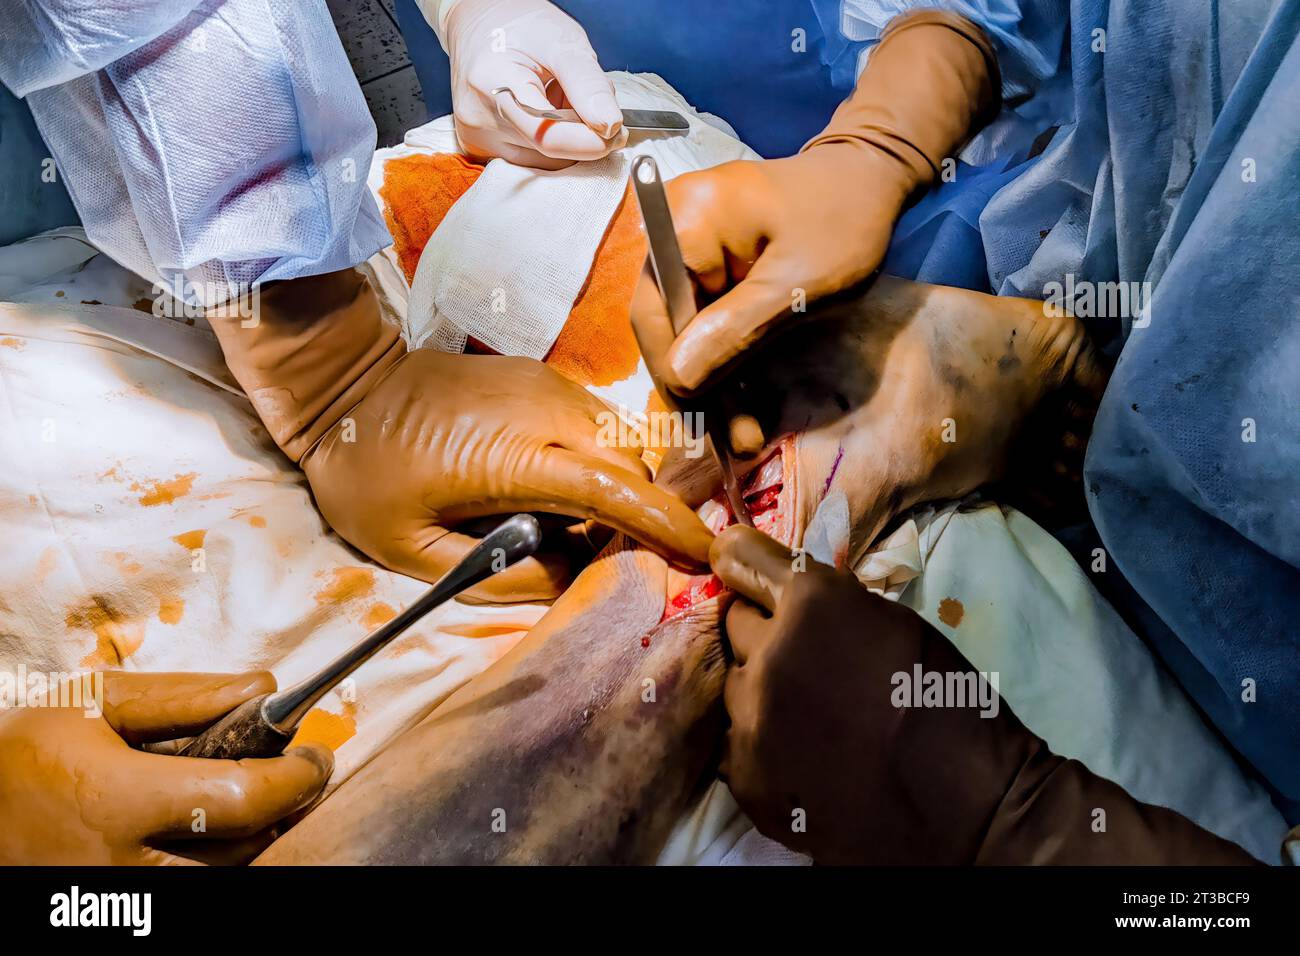 Following leg fracture, metal plate is inserted during surgery by doctors. Stock Photo